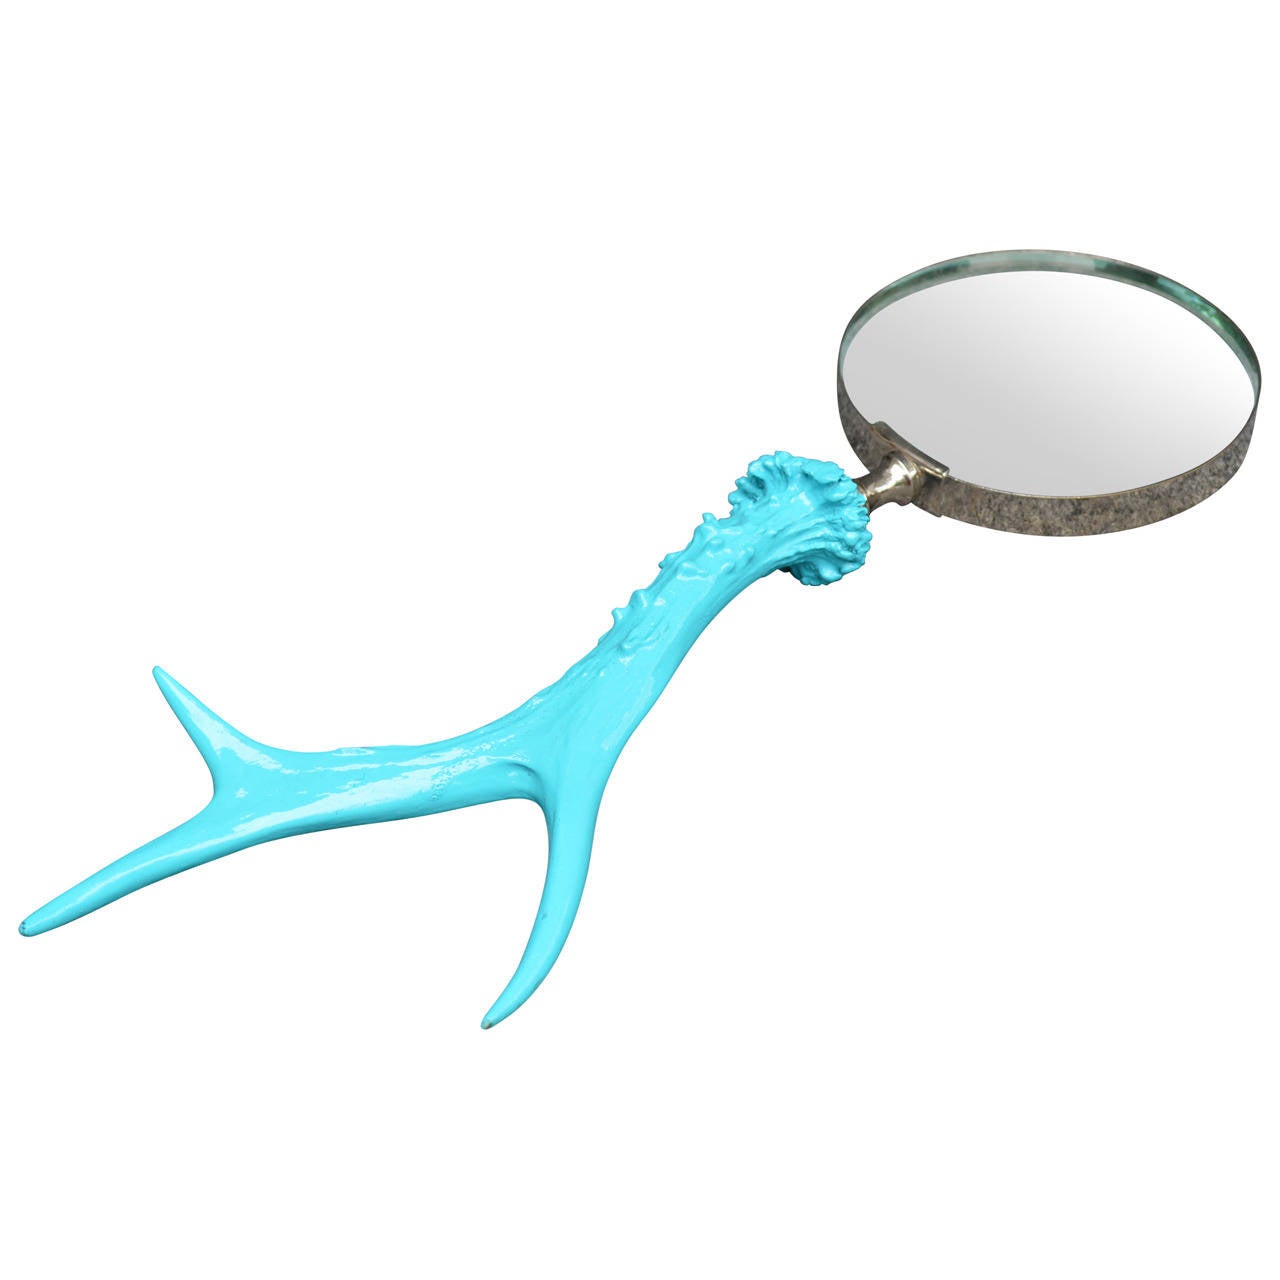 American Pair of Lacquered Antler Magnifying Glasses